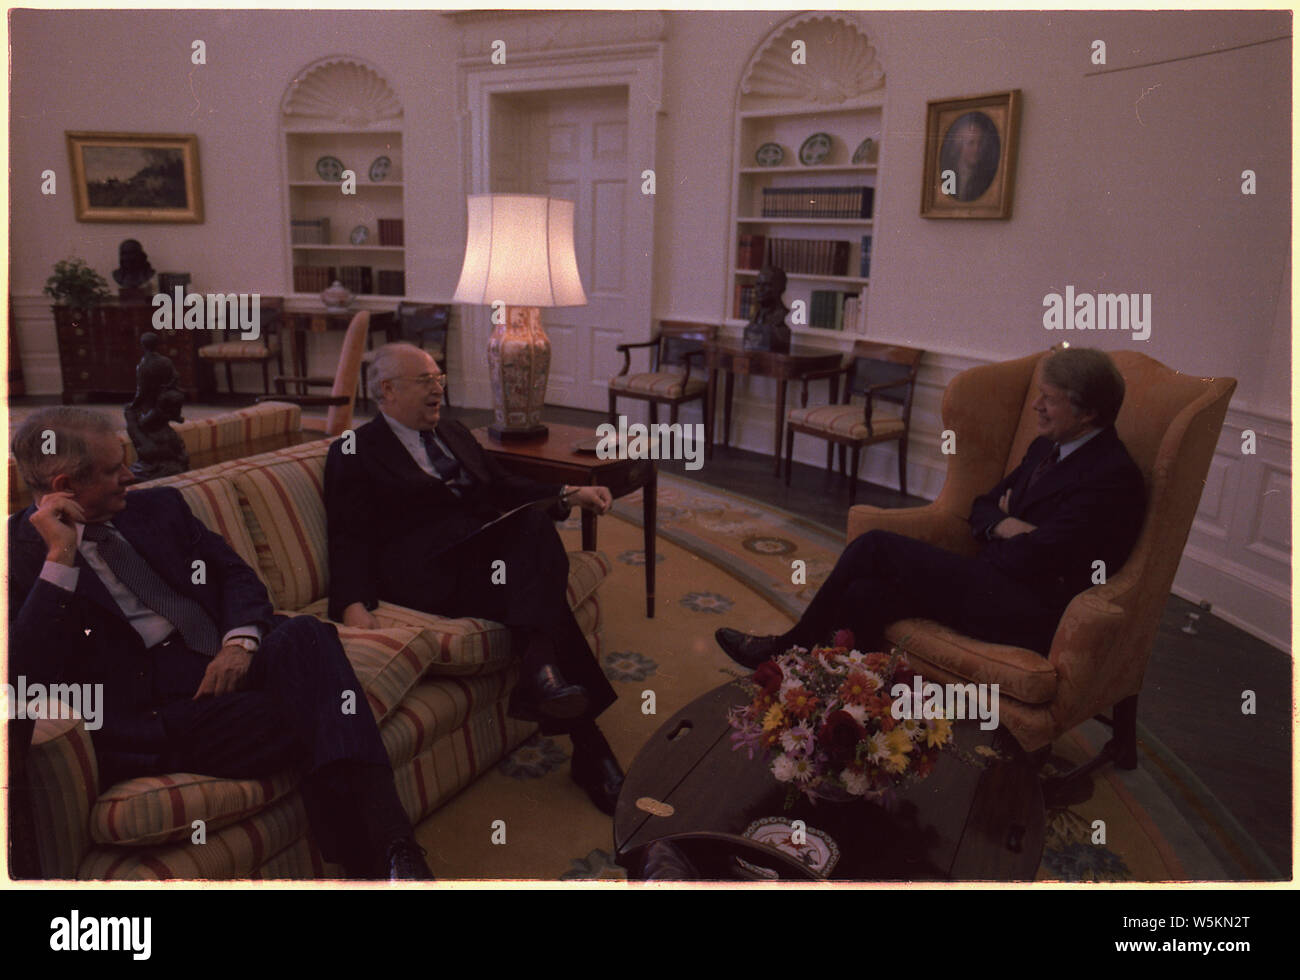 Cyrus Vance, USSR Ambassador Anatoly Dobrynin meet with Jimmy Carter in the Oval Office. Stock Photo